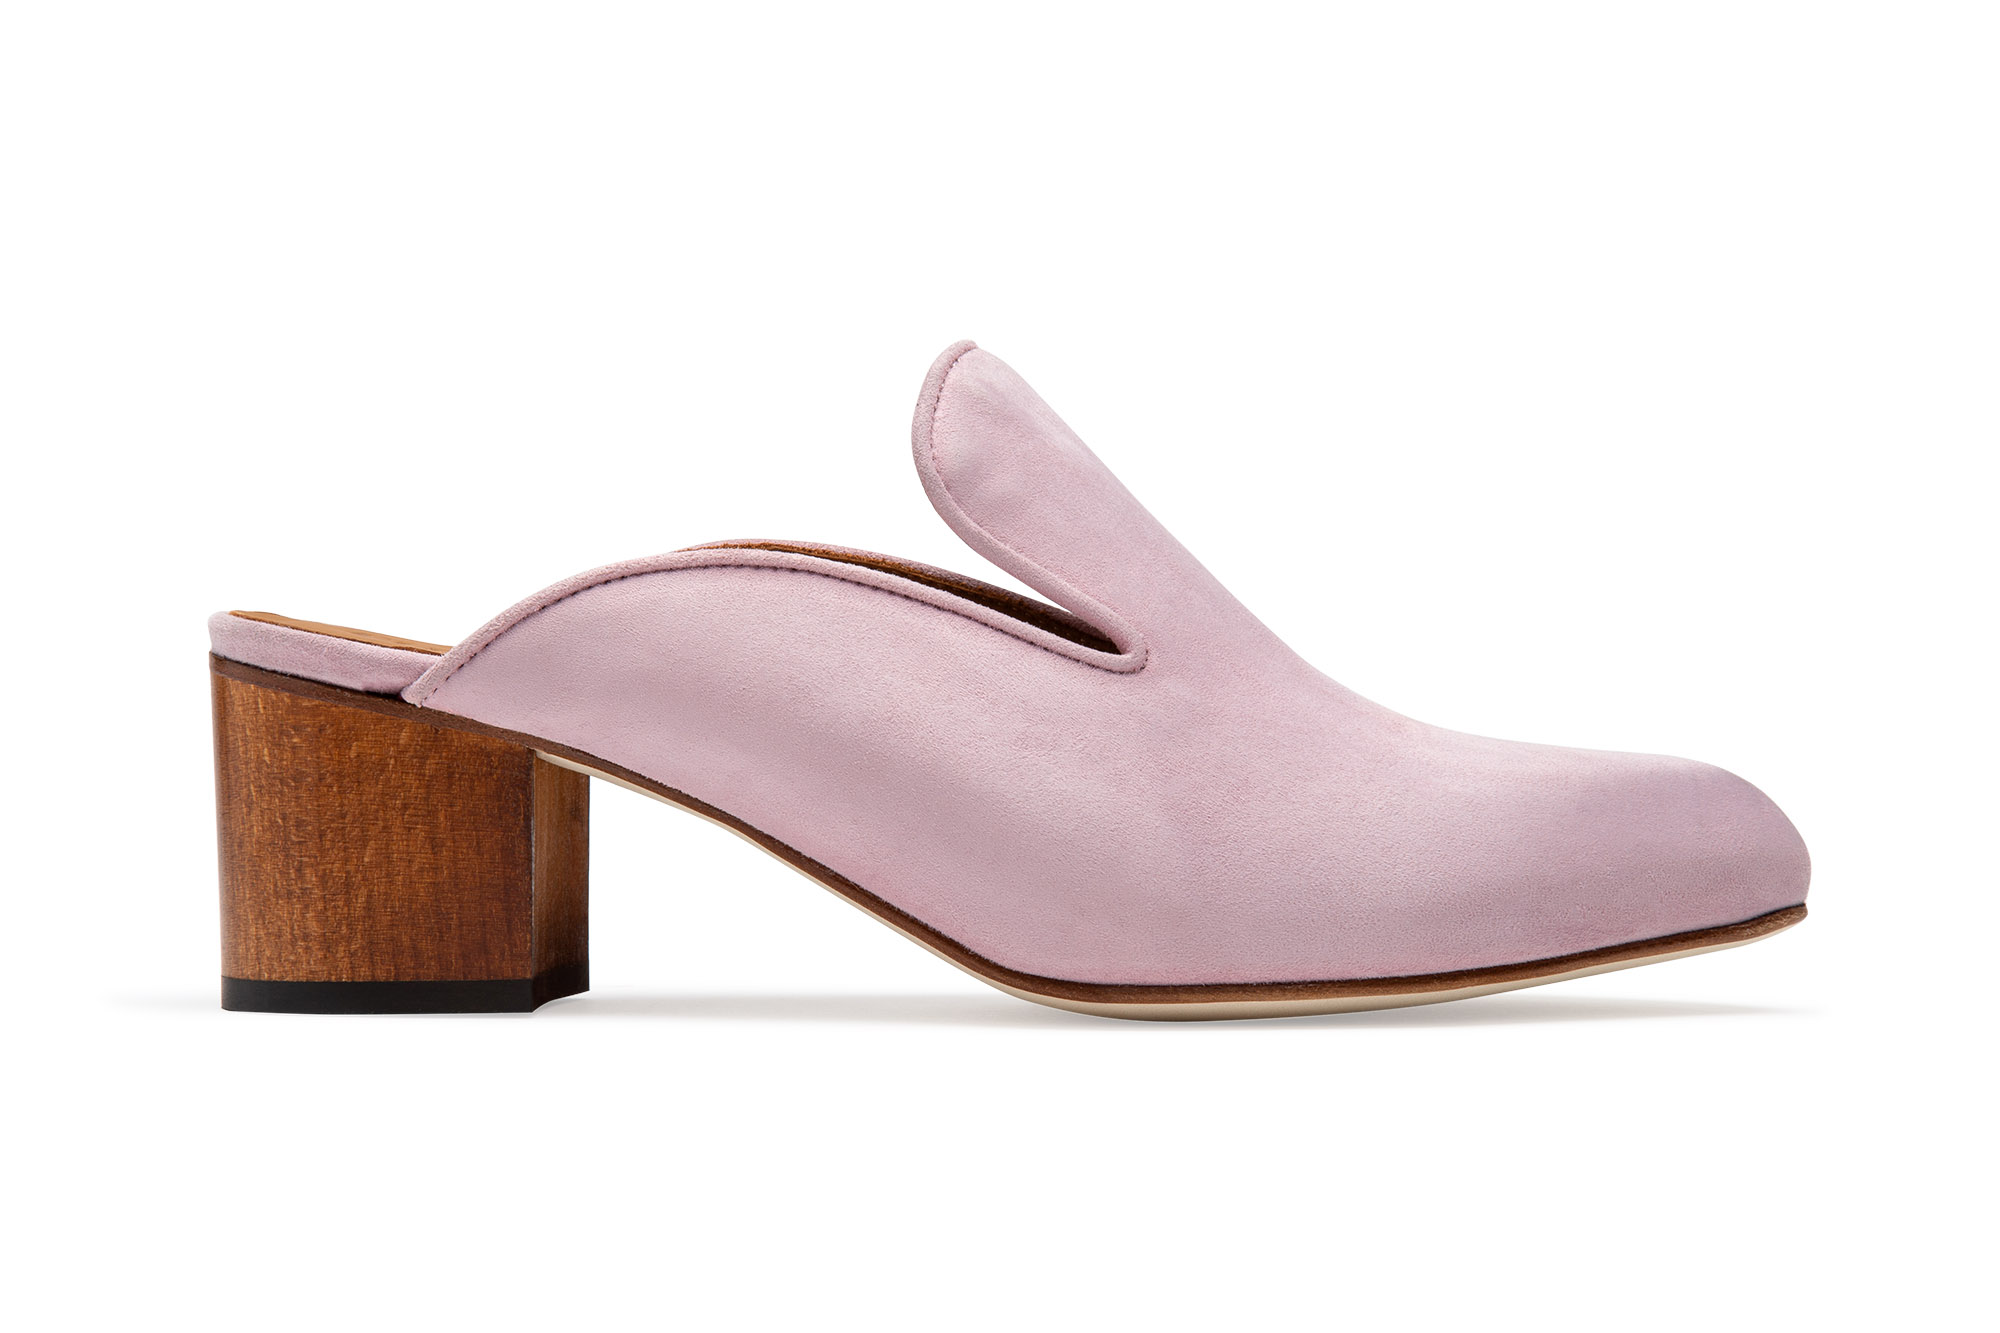 Women's pink suede slide e-commerce photography for Thelma Shoes